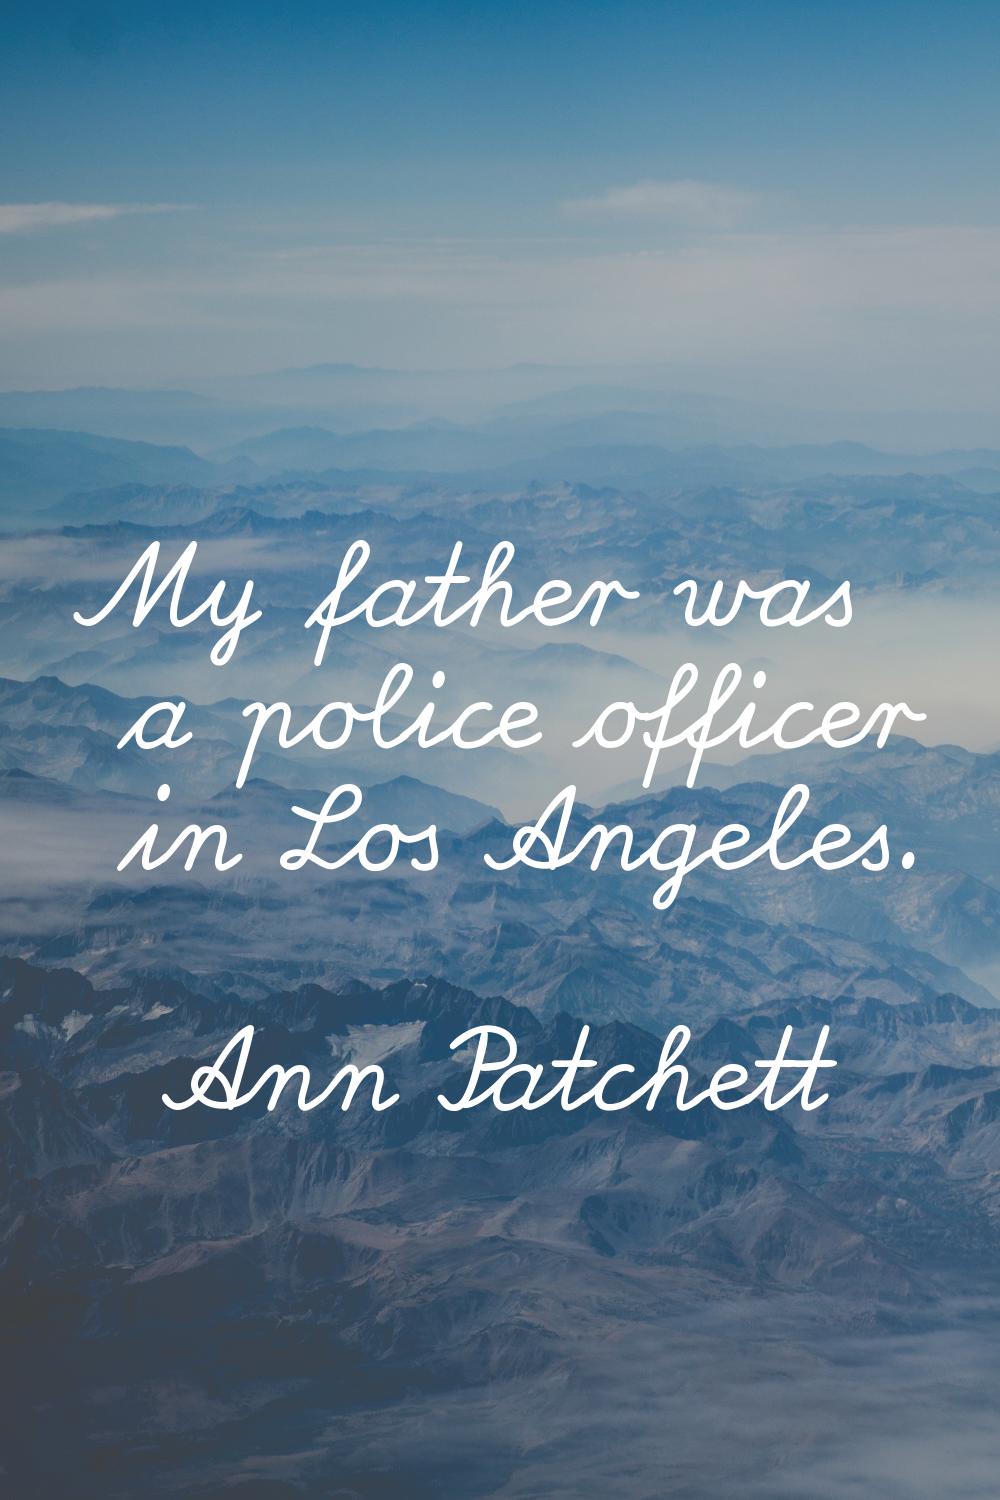 My father was a police officer in Los Angeles.